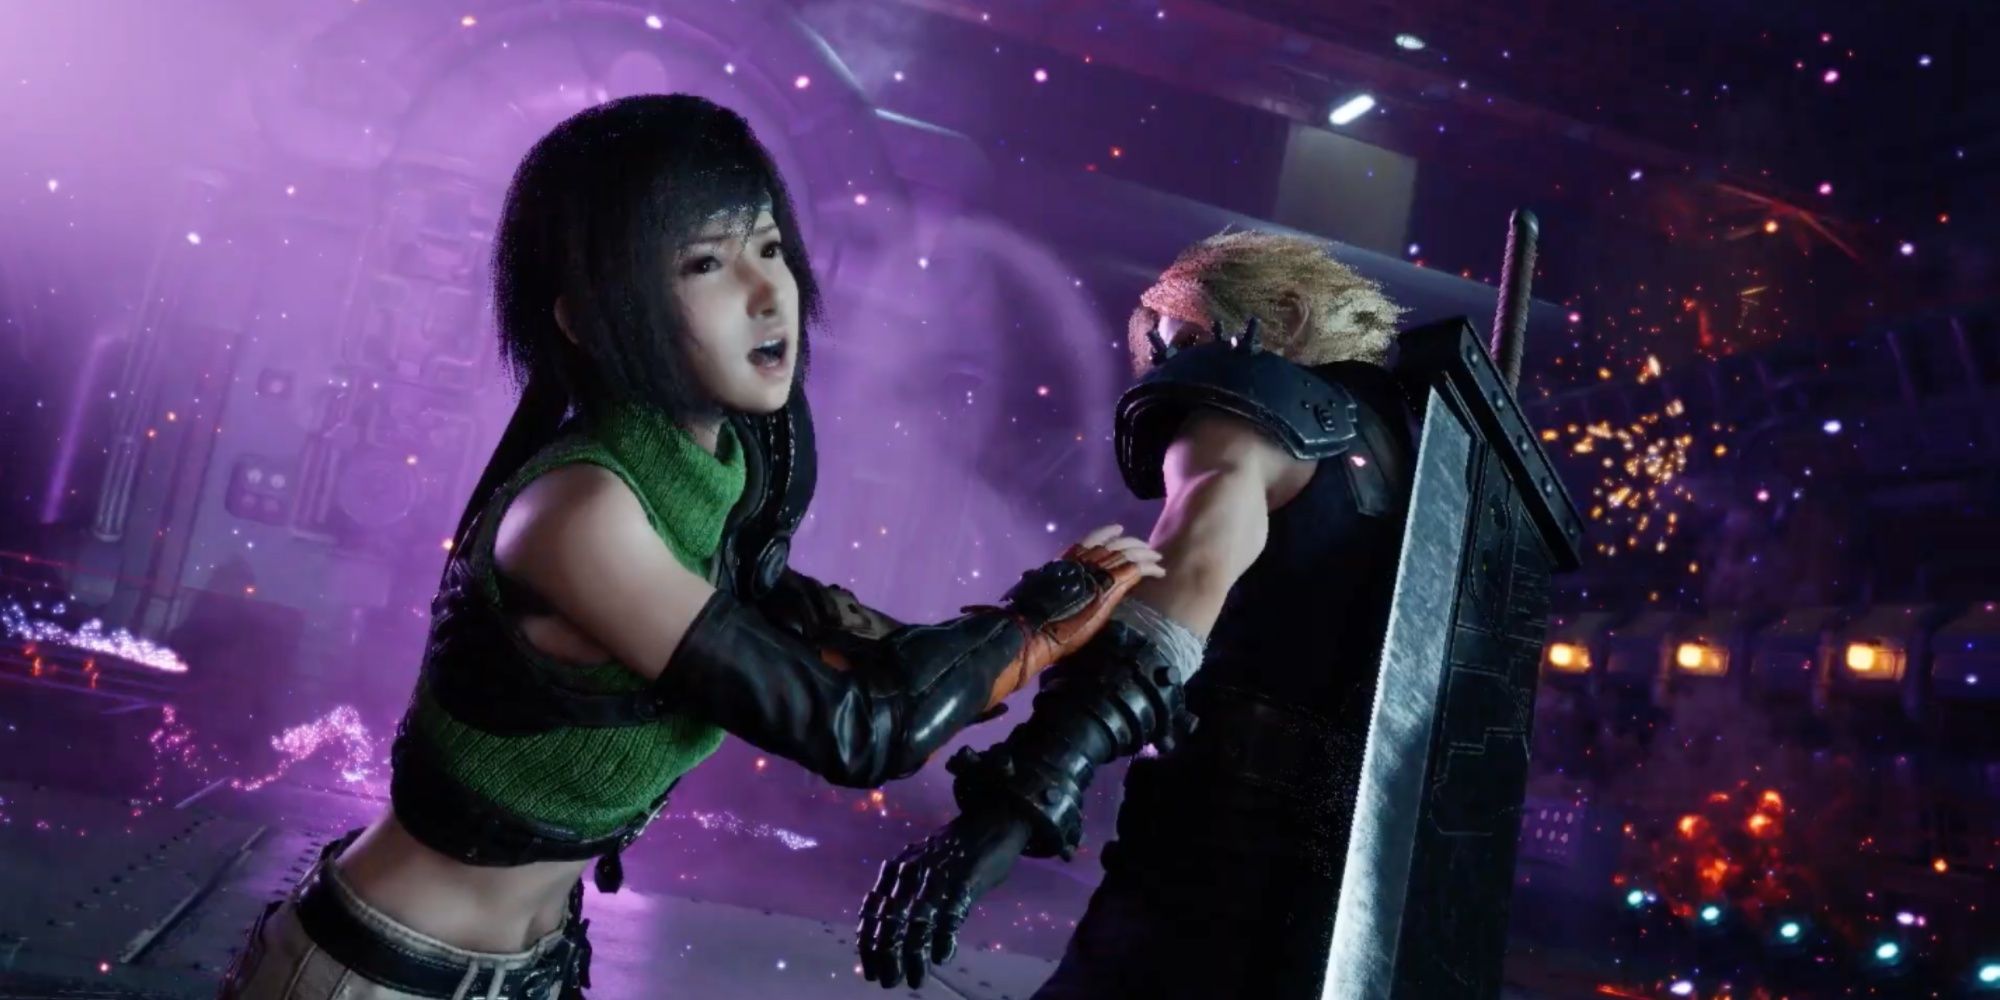 Yuffie and Cloud in Final Fantasy 7 Rebirth